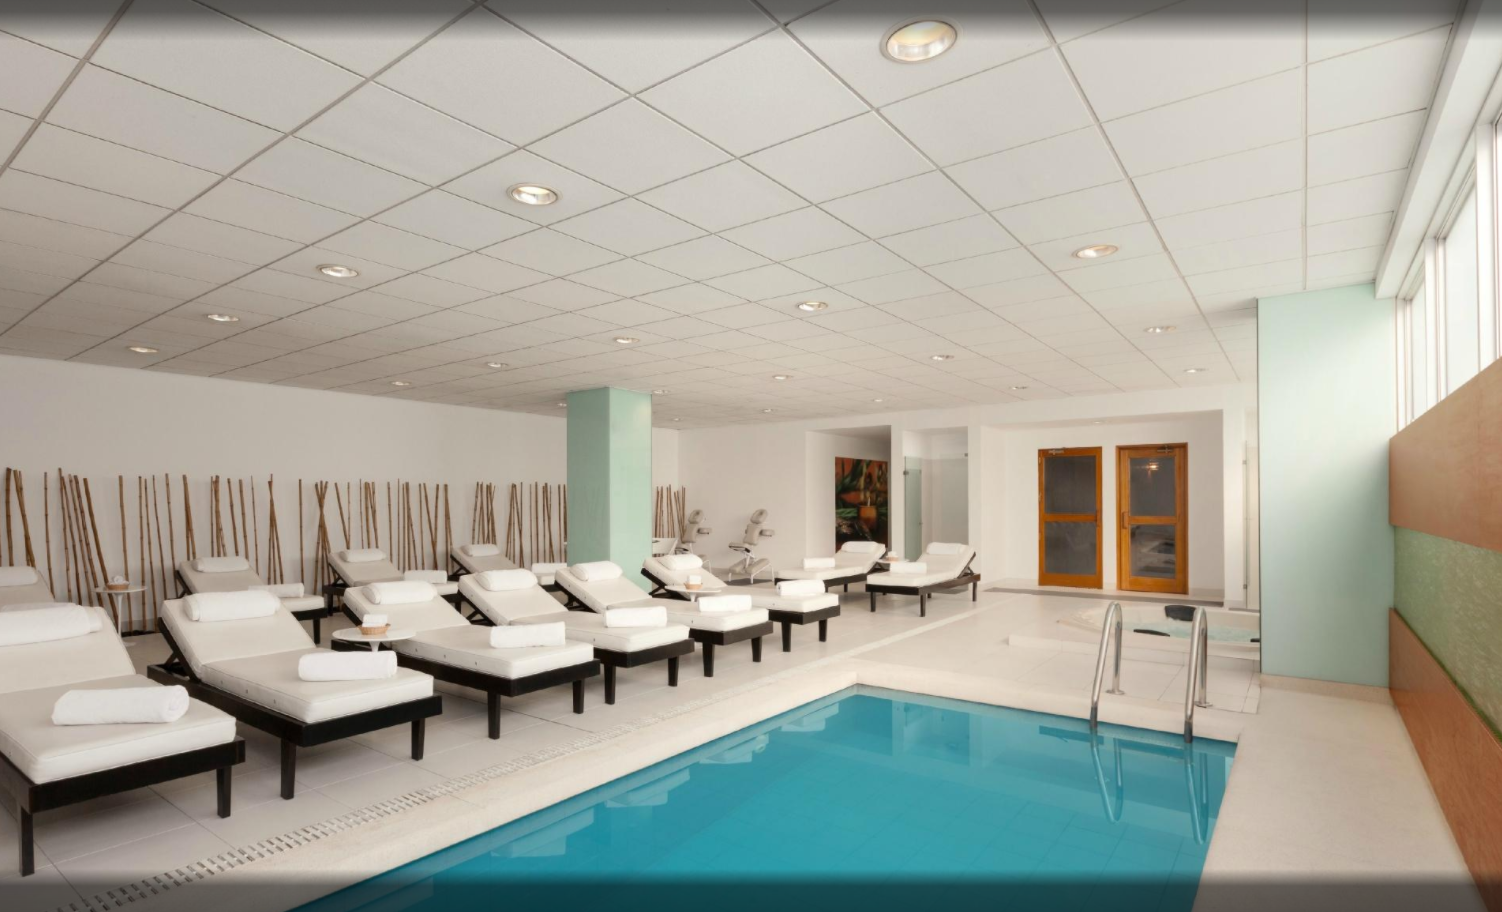 Wyndham Costa del Sol indoor pool with chaise lounge chairs